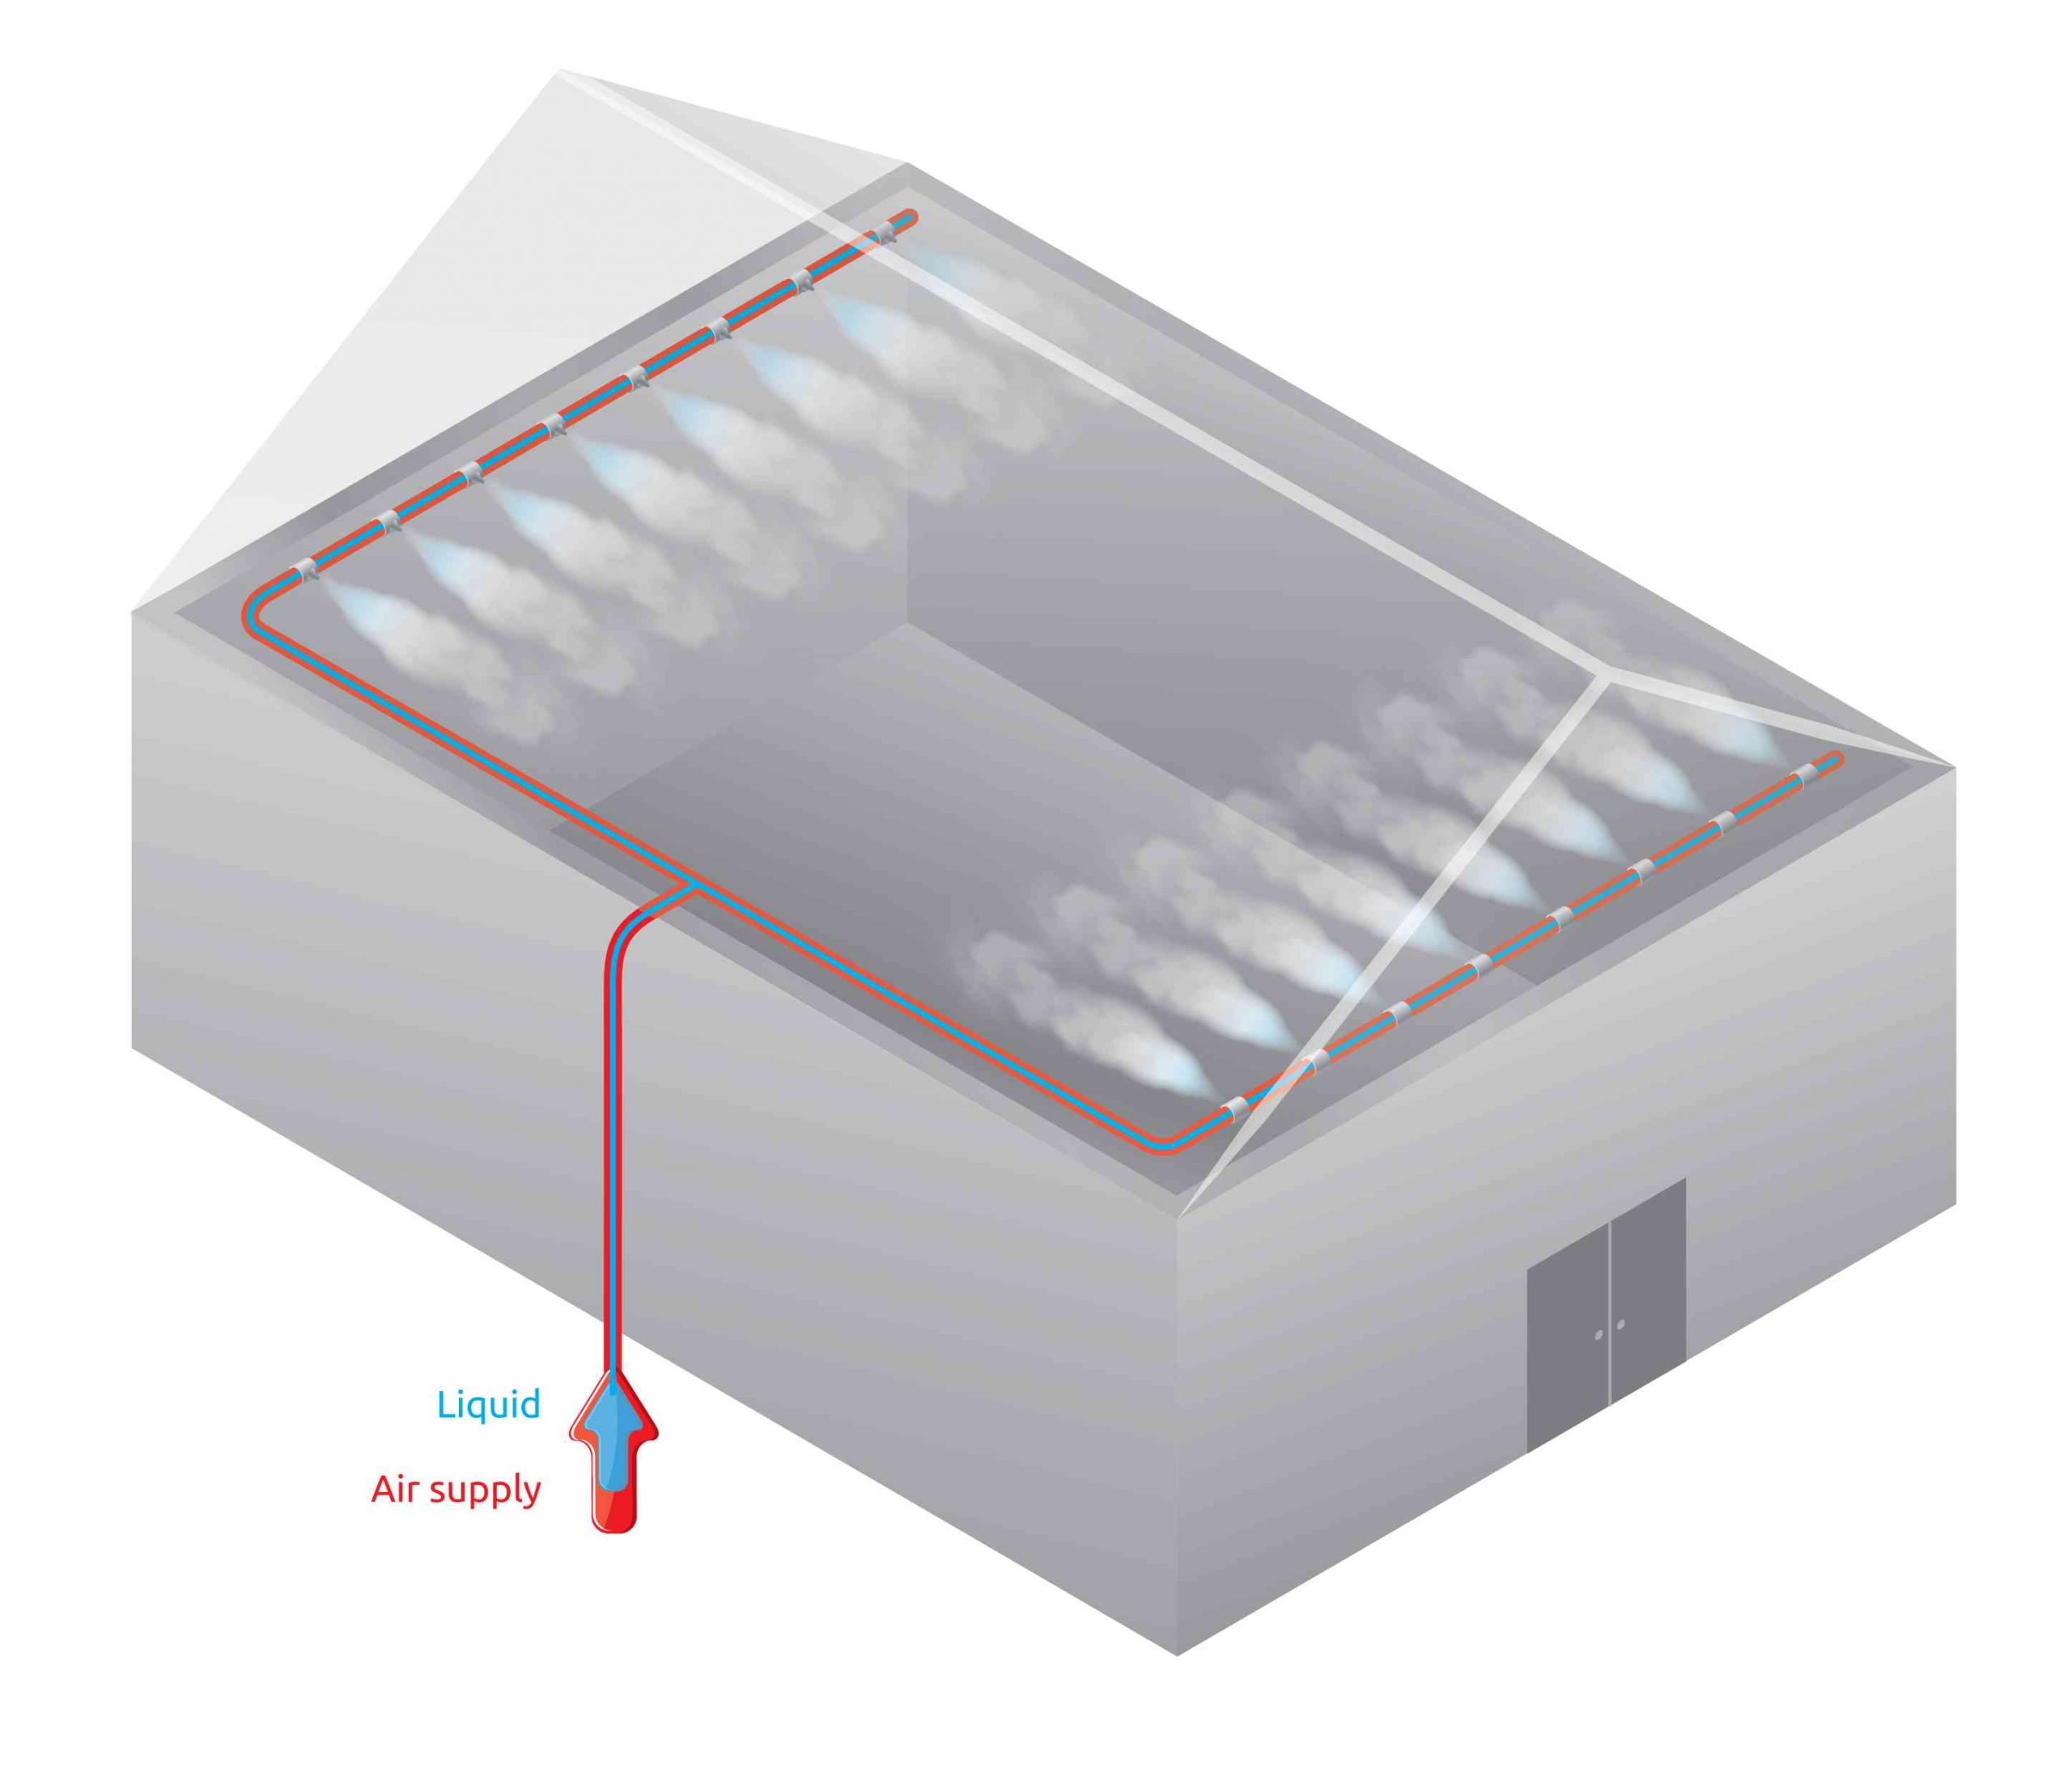 Illustration of a building with a humidification system.